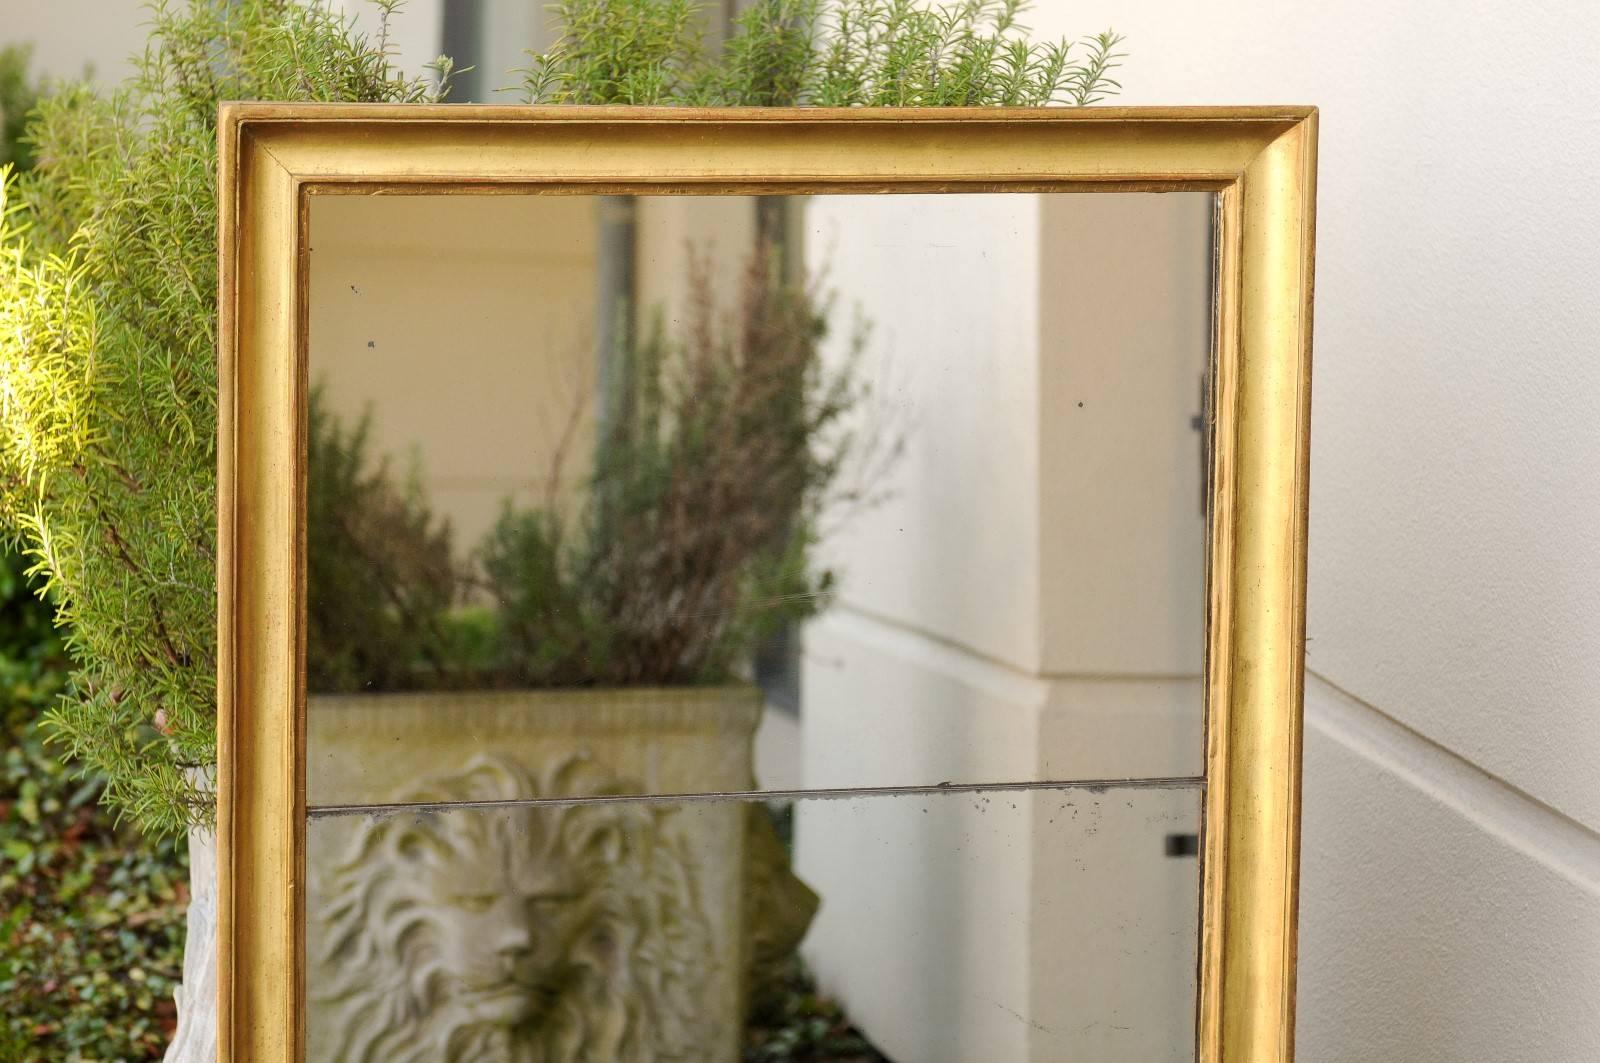 20th Century French Giltwood Rectangular Mirror with Split Glass from the Turn of the Century